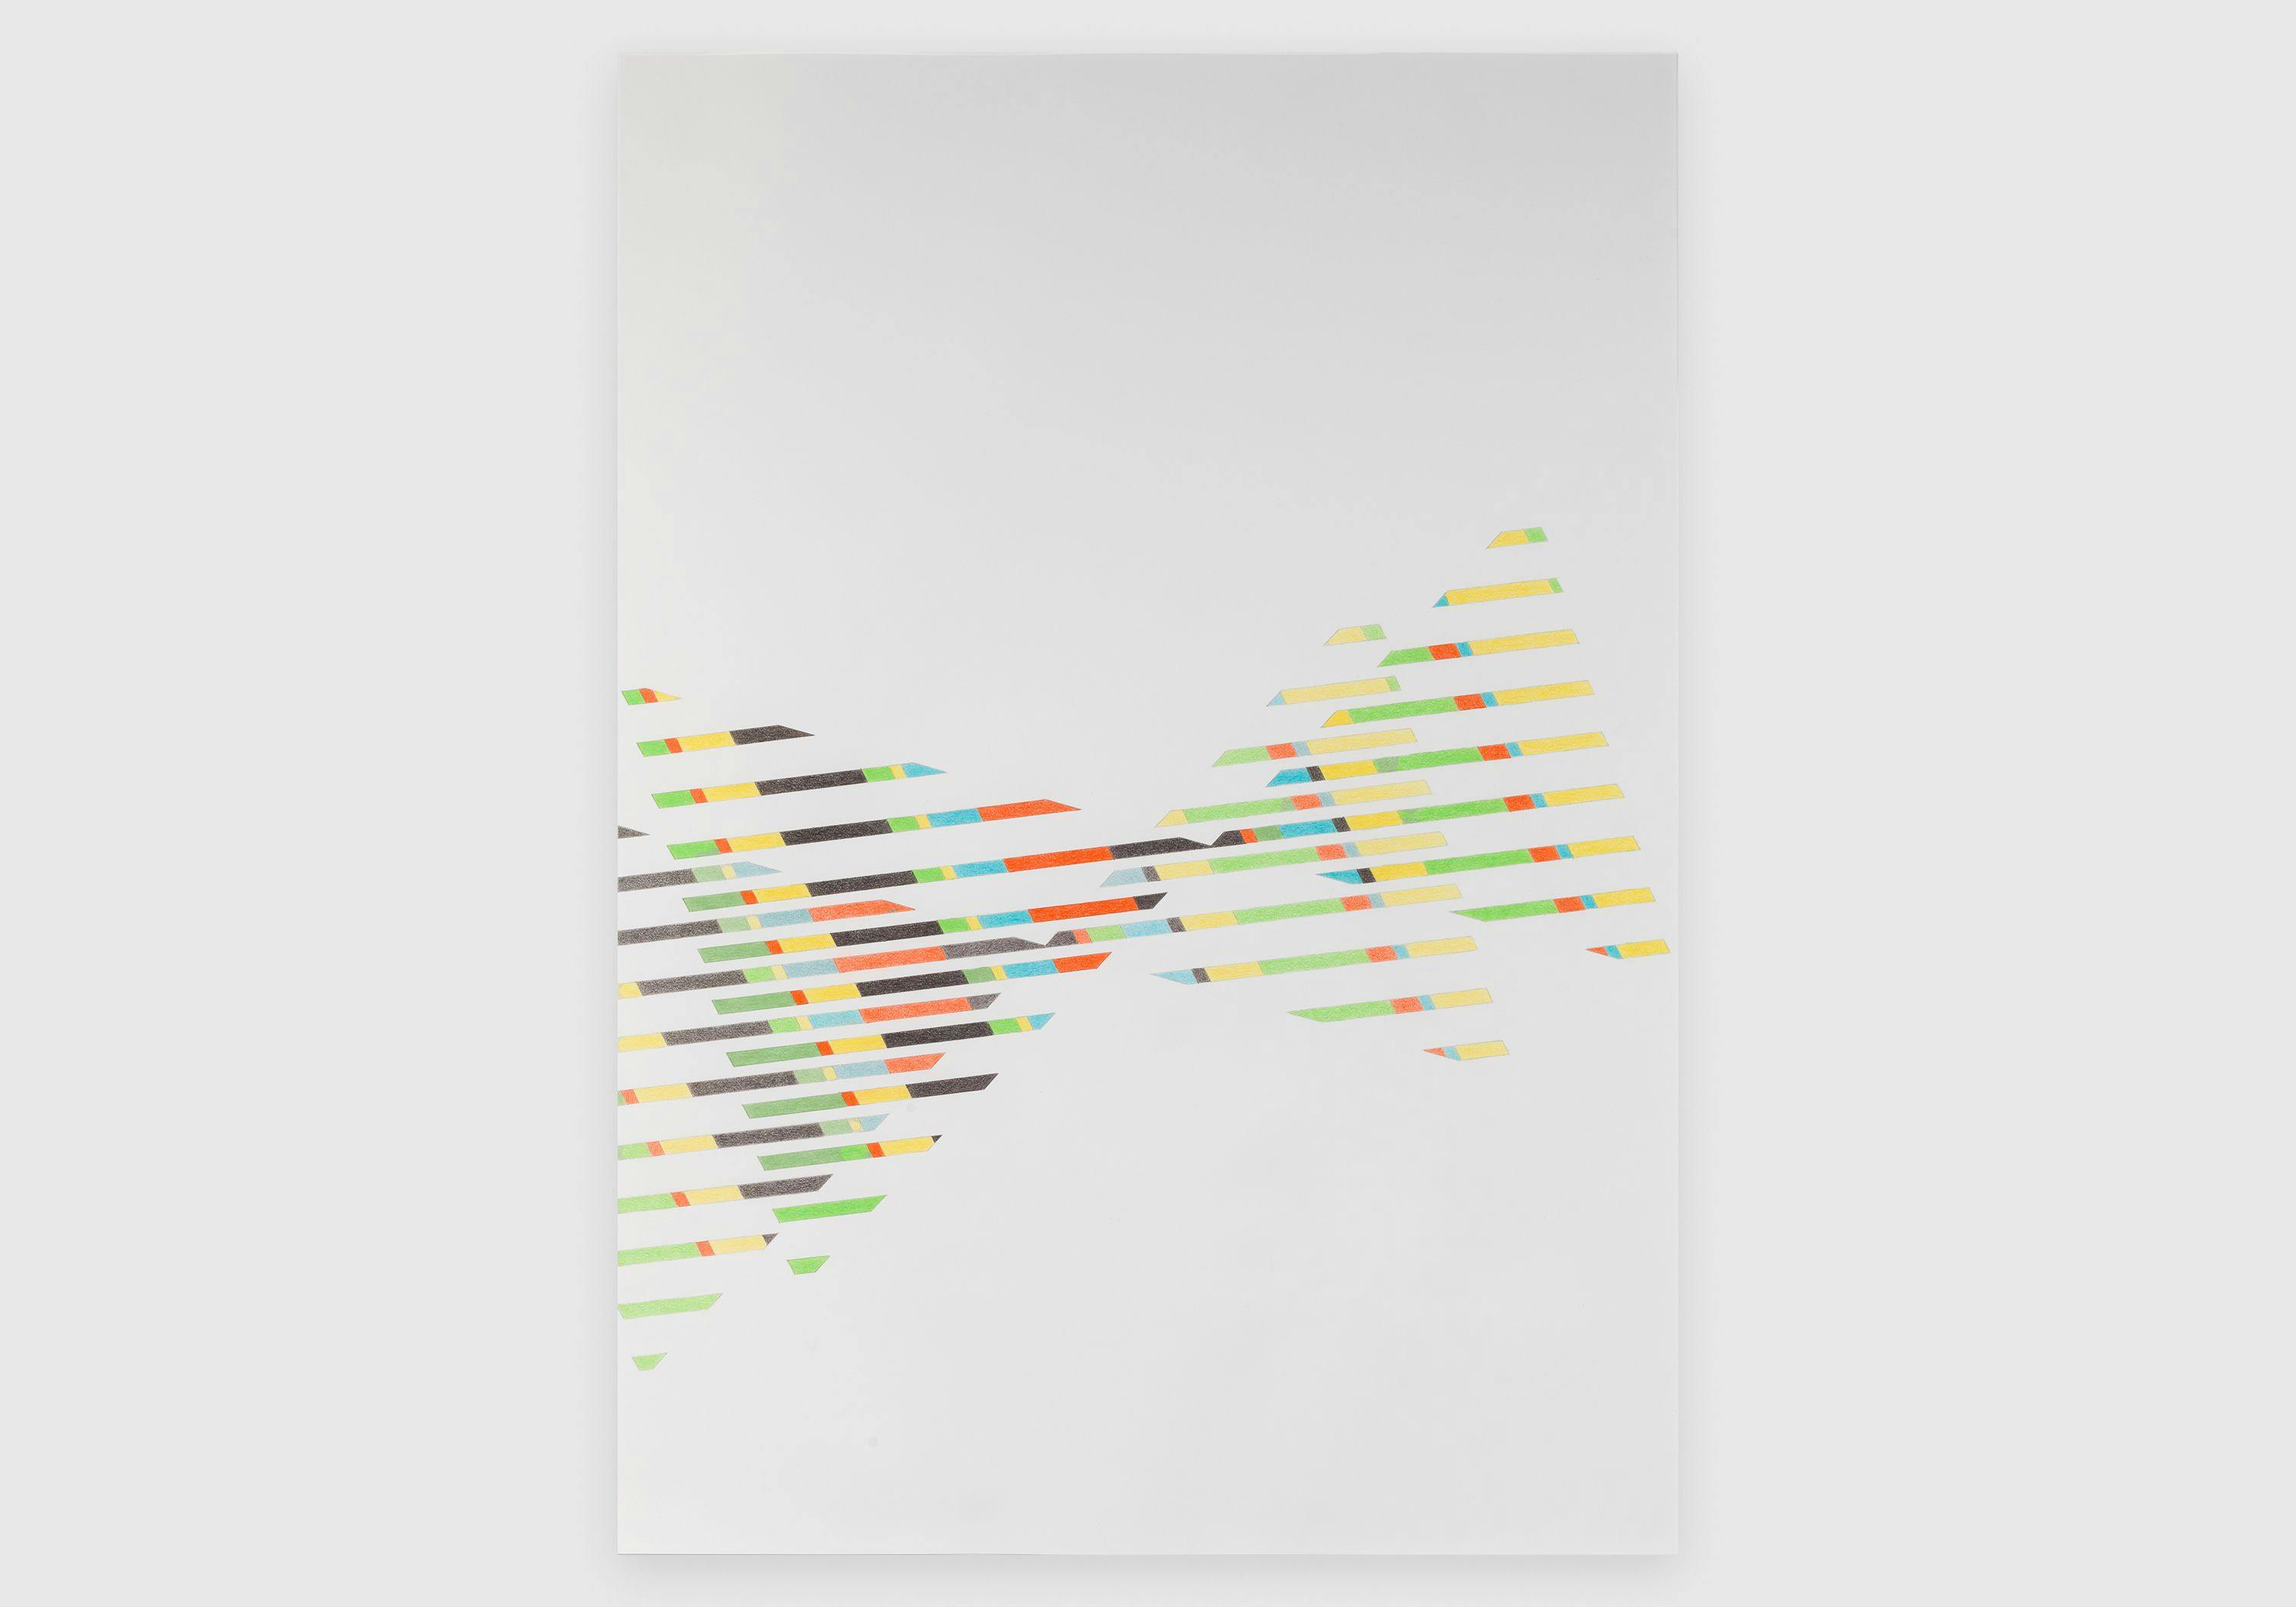 A drawing by Tomma Abts, called Untitled #6, dated 2013.